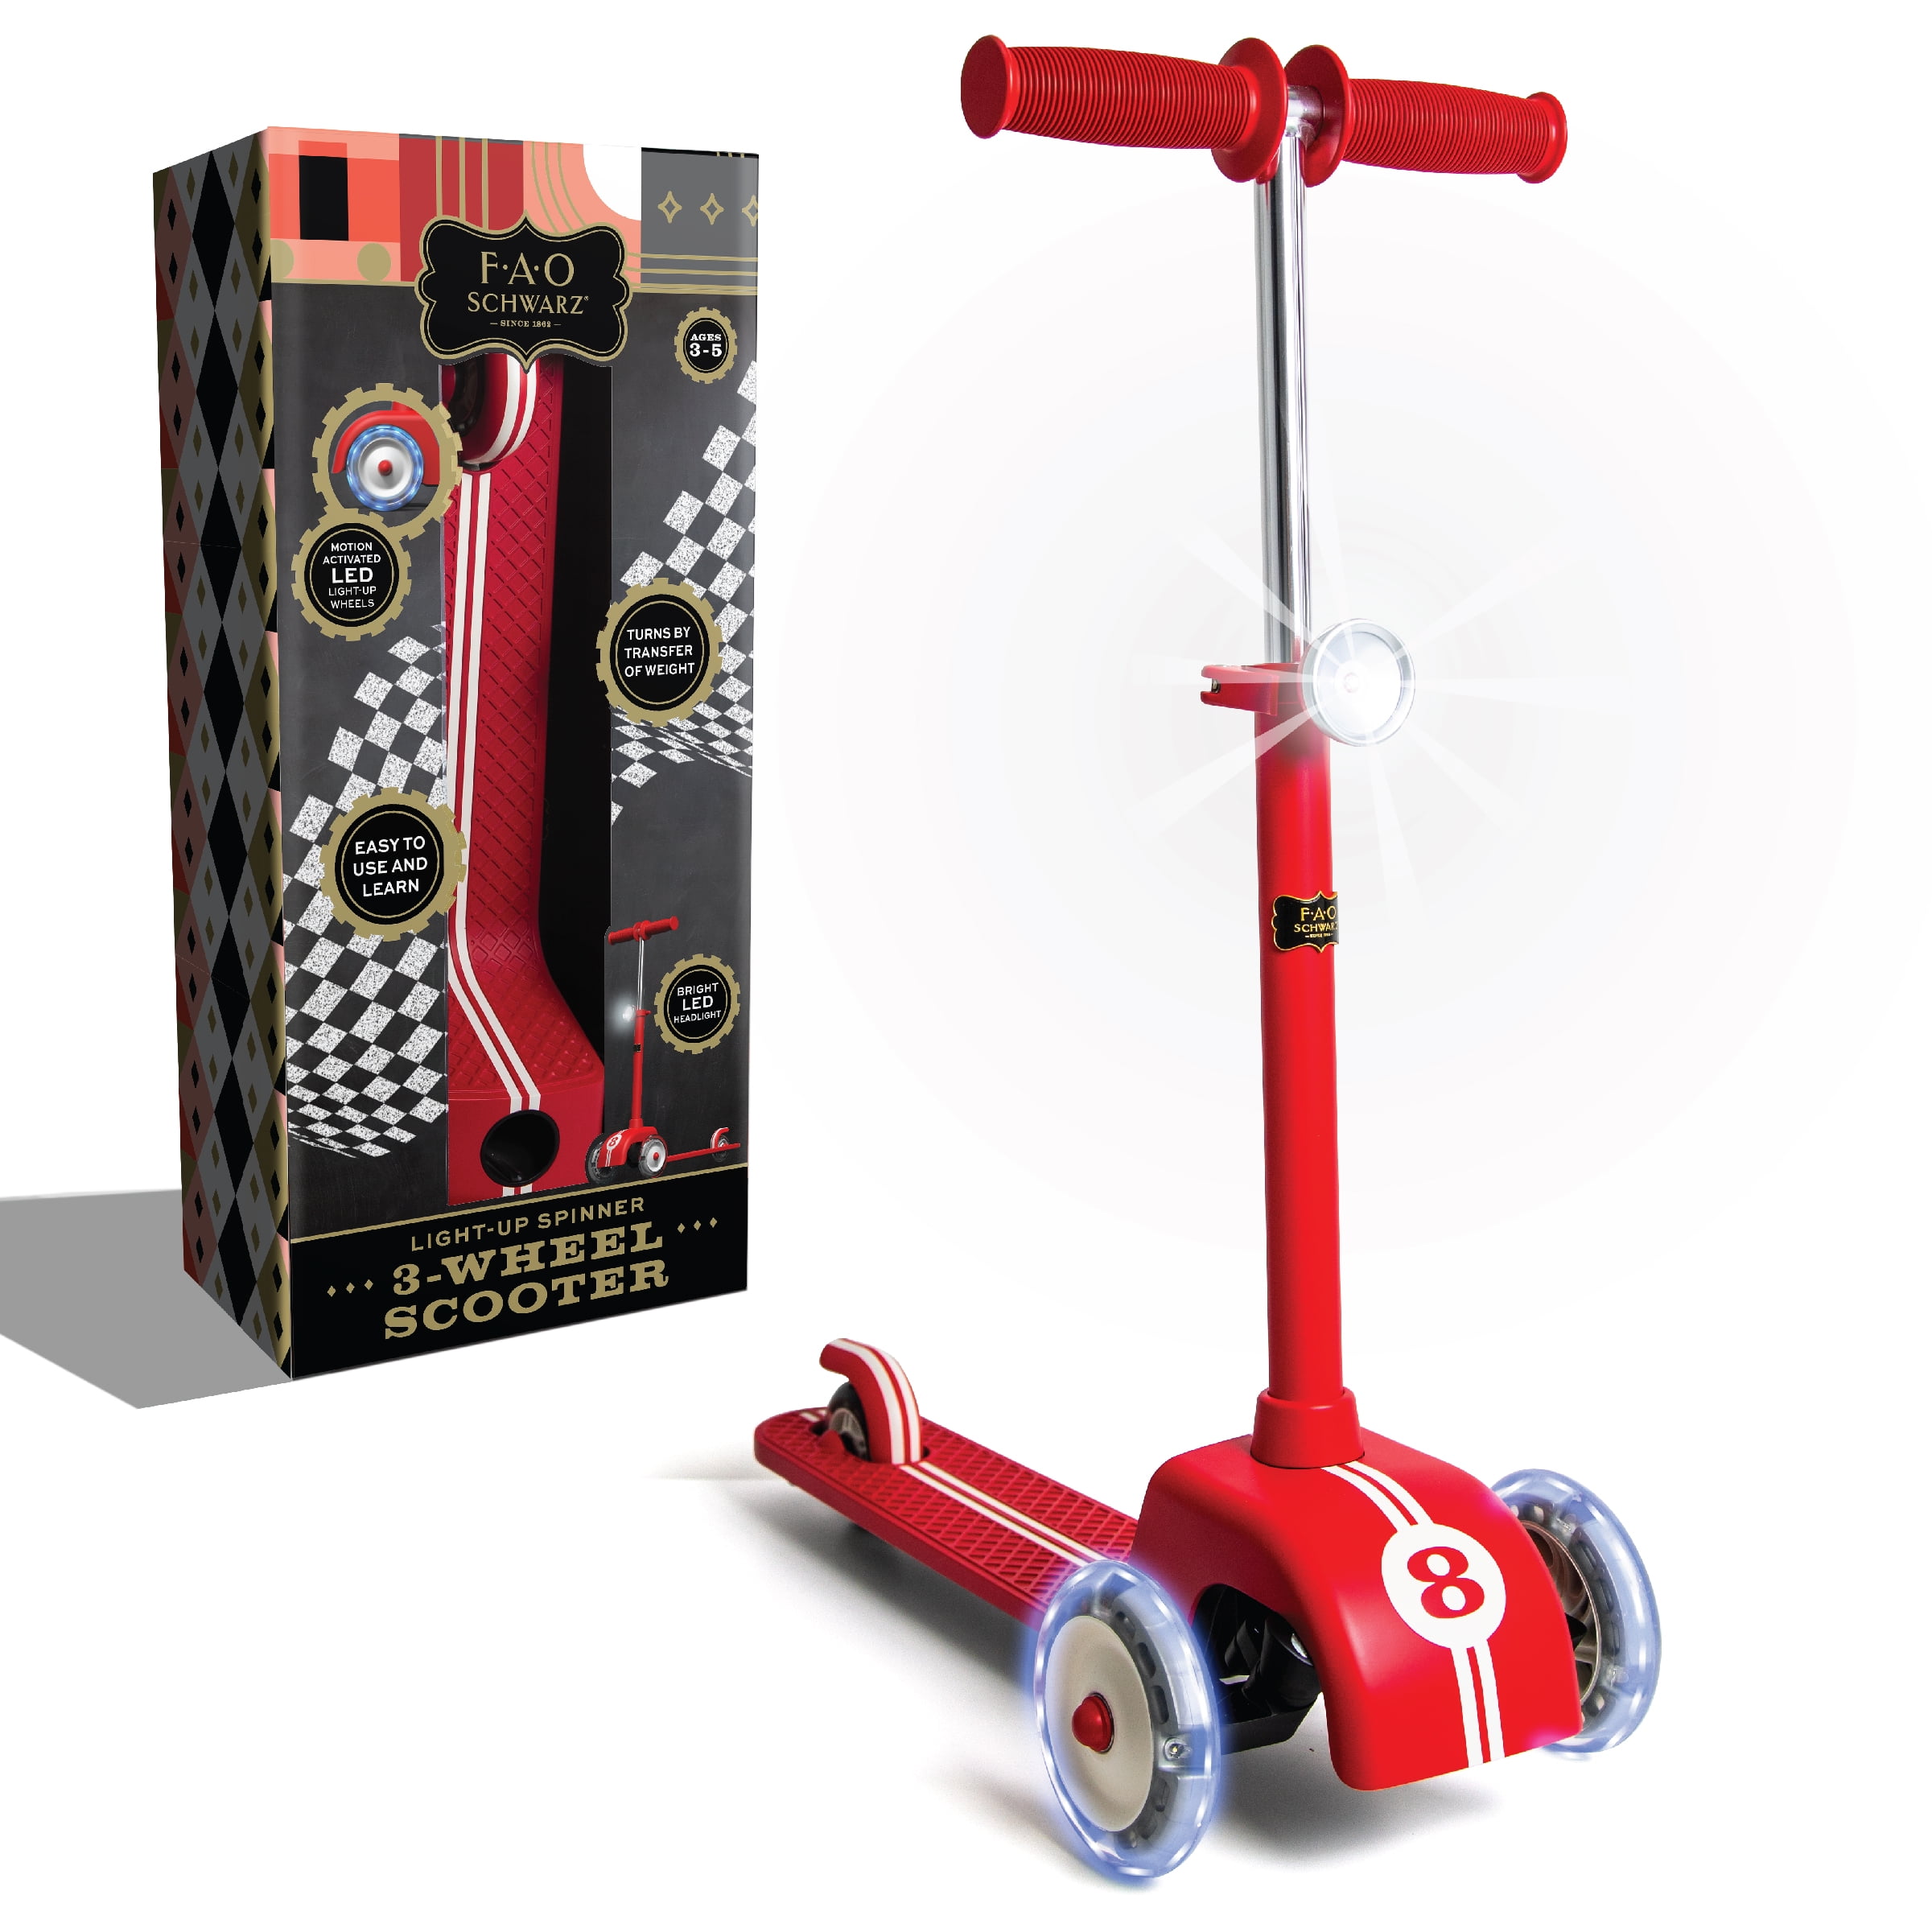 White FAO LED Spinner Play Schwarz Striped Scooter Day/Night Kids Red Fun with Outdoor Height Razor Activity Adjustable Light-Up 3-Wheel for Kickstart